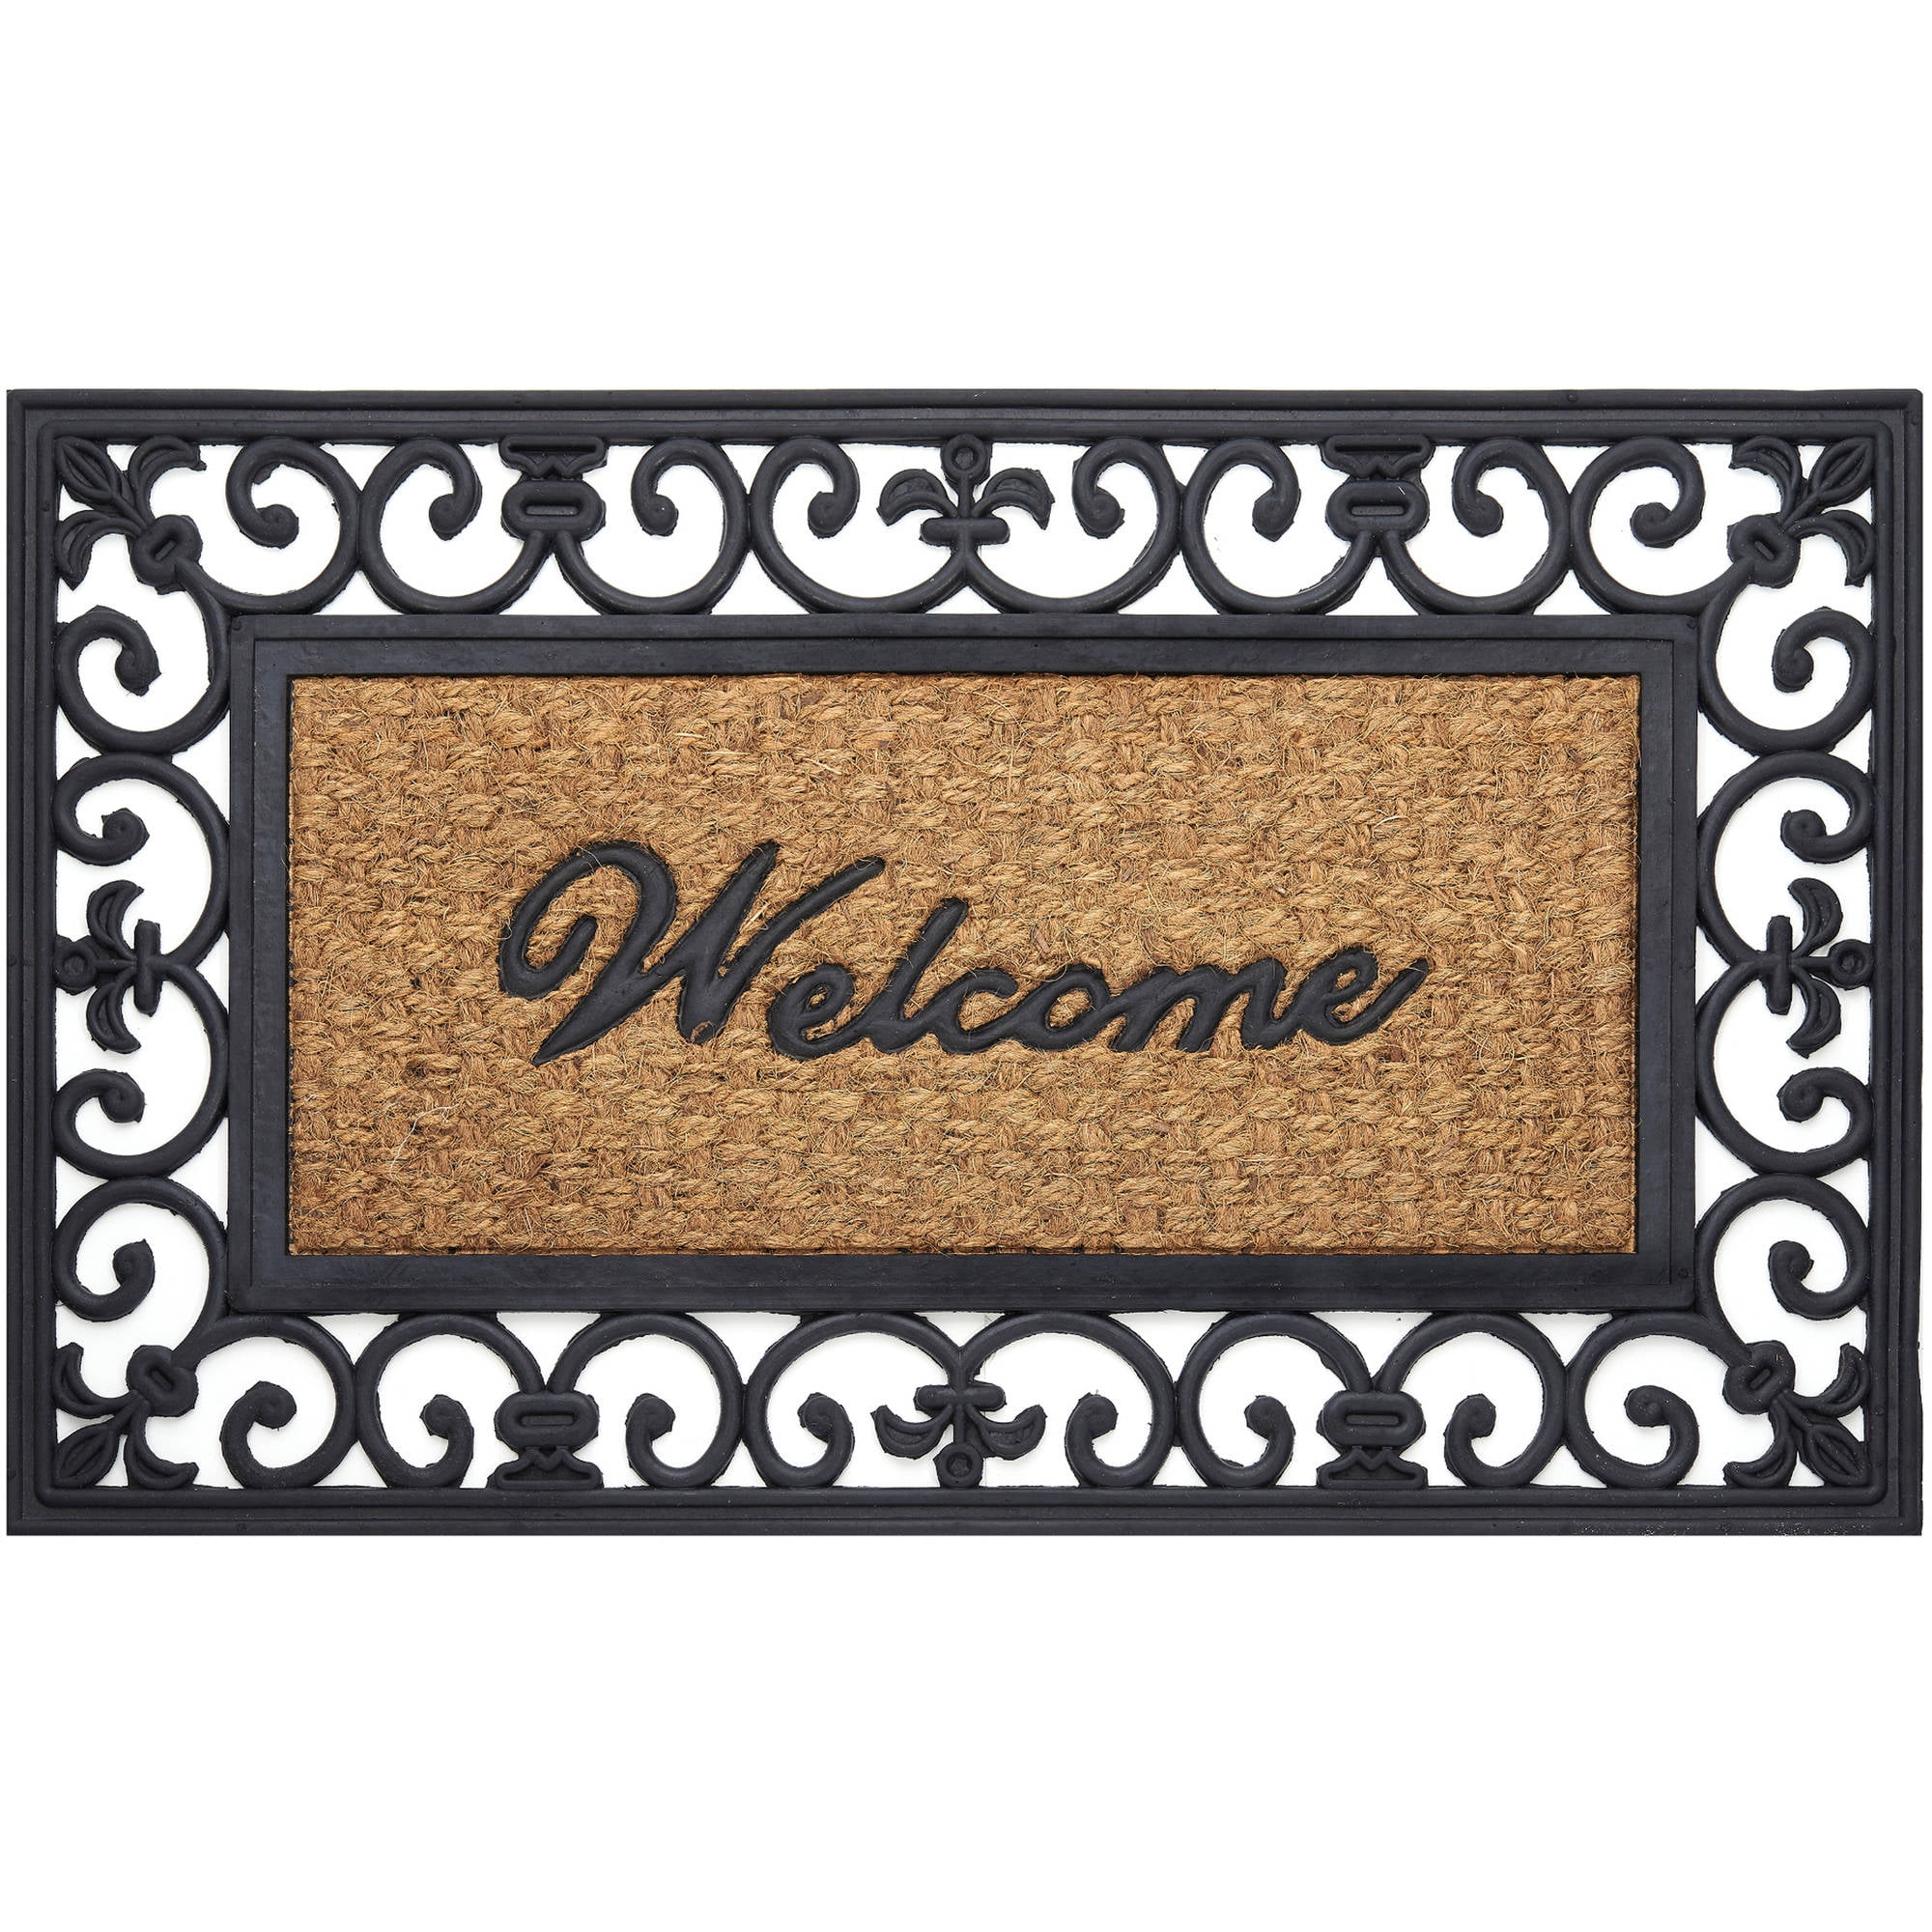 Beautiful Decorative Rubber Doormat to Place on the Entrance Door to your House 